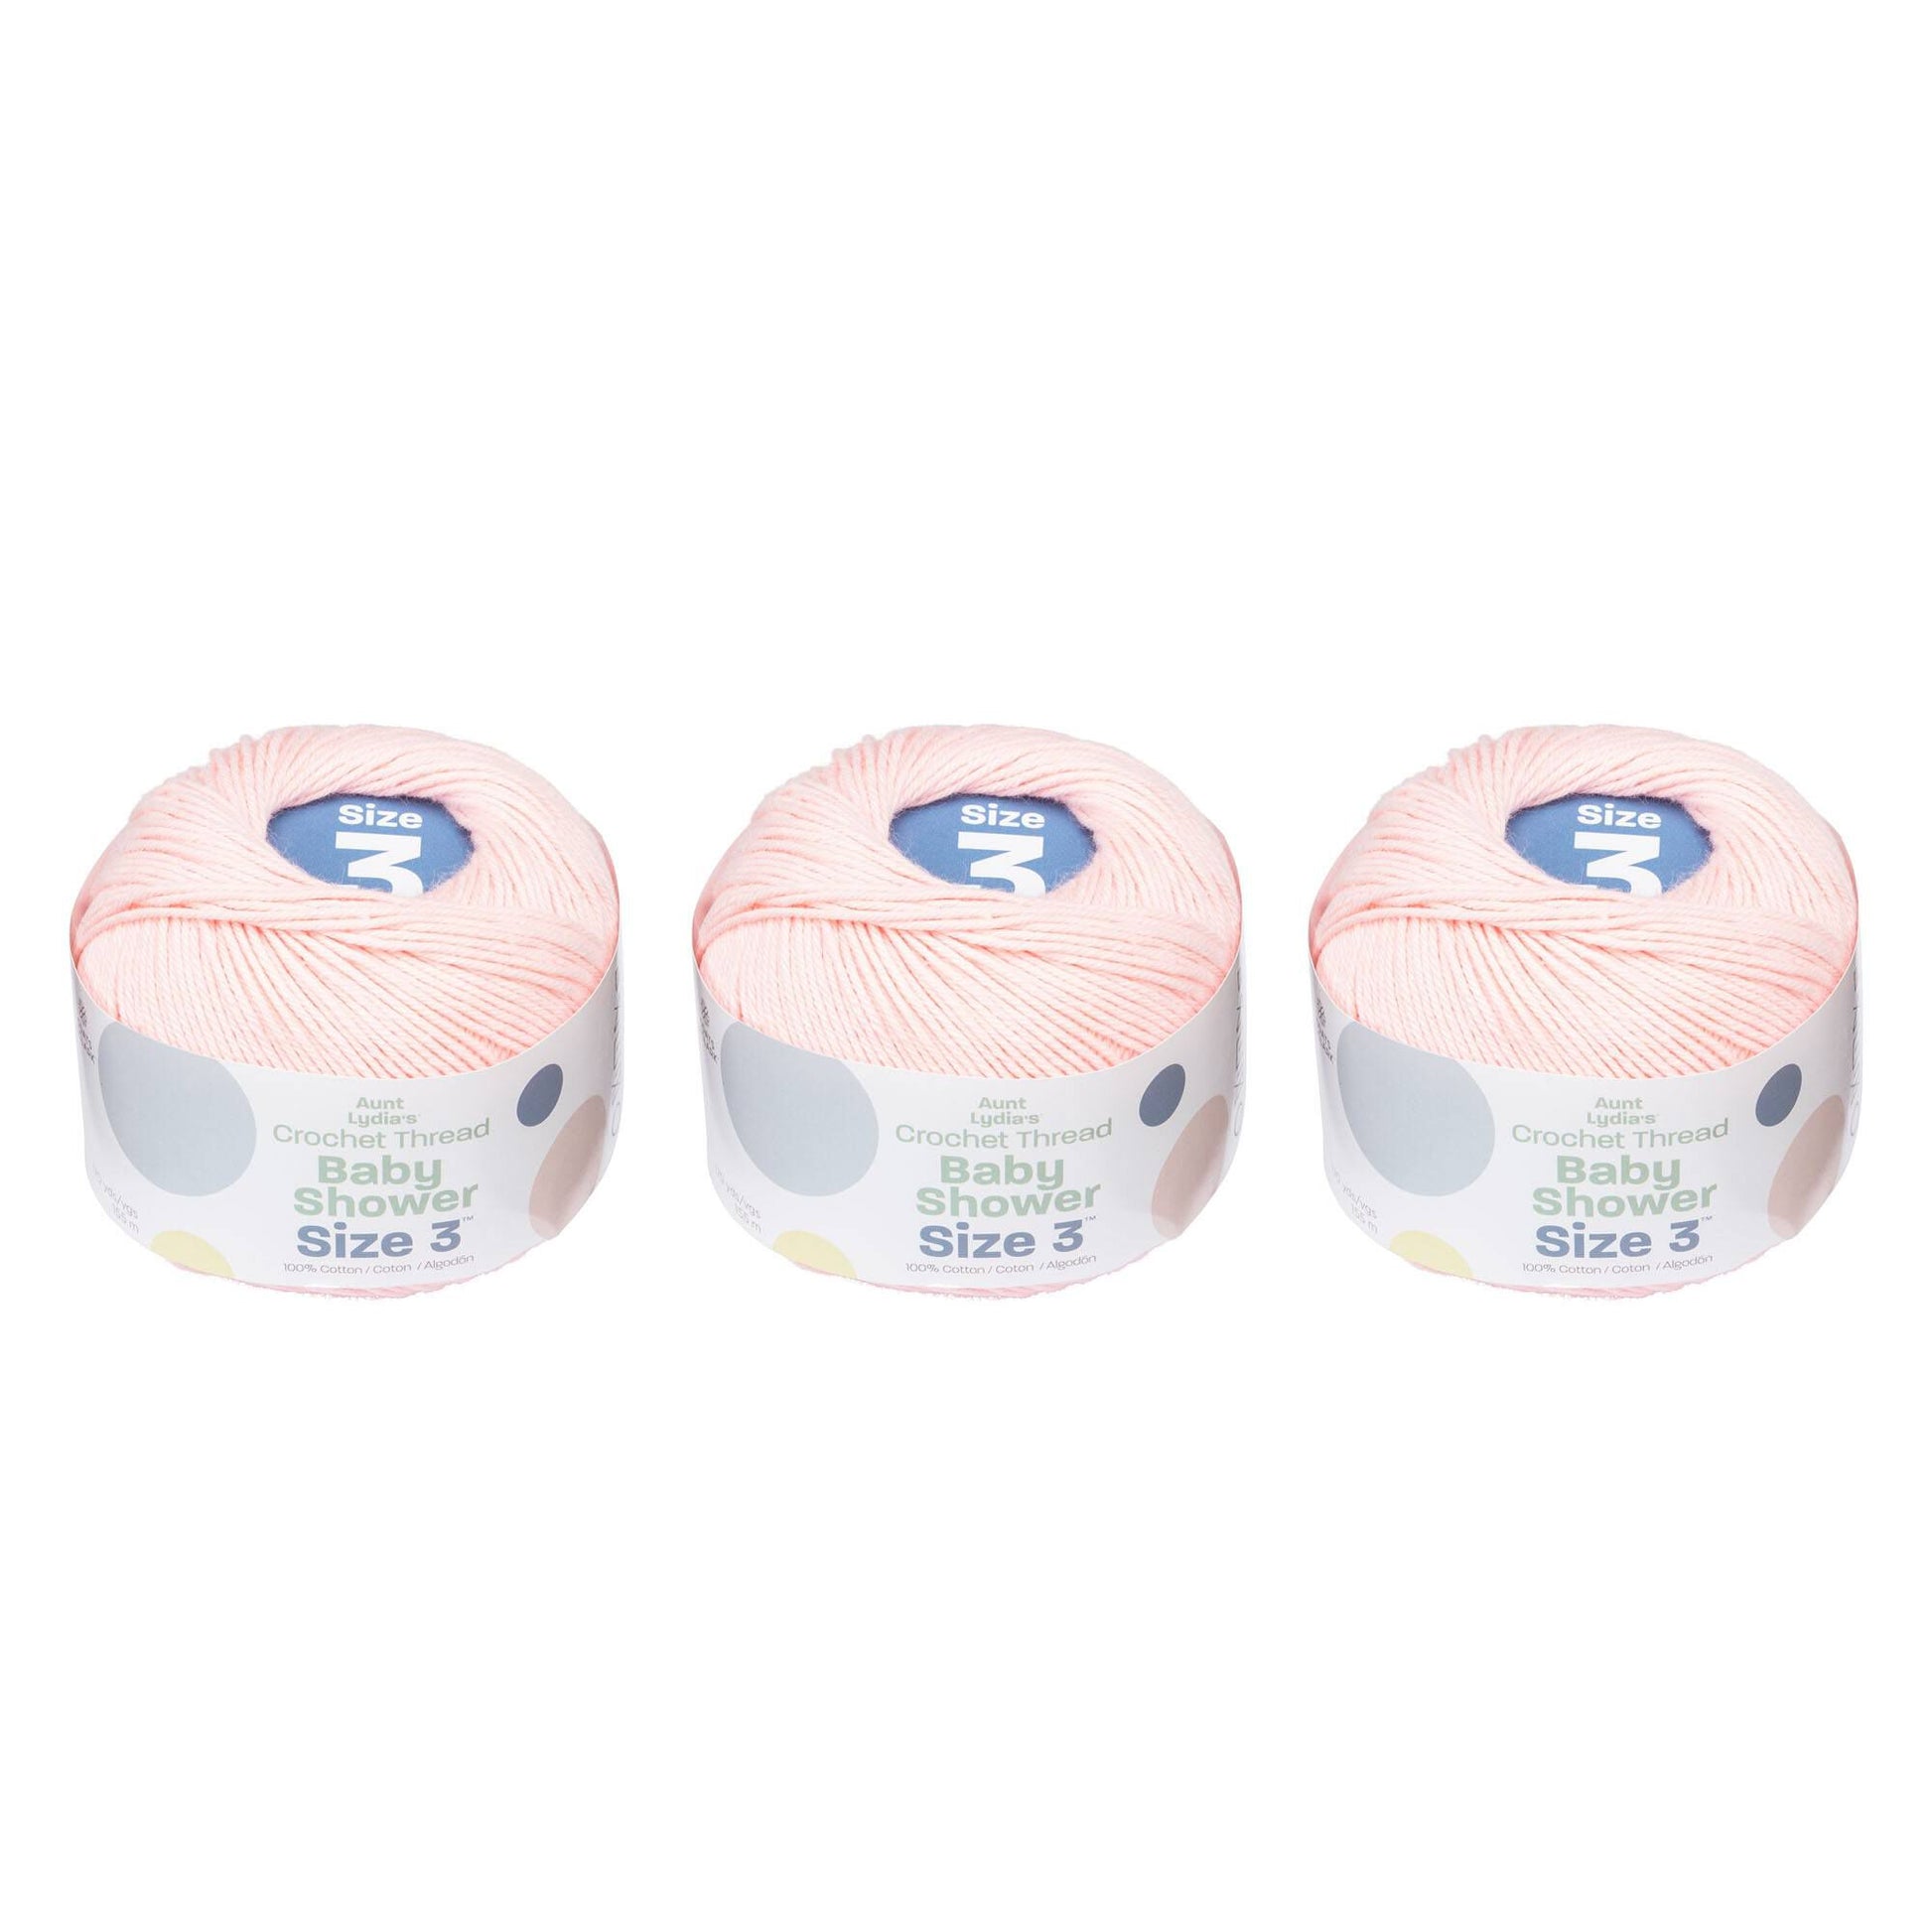 Aunt Lydia's Baby Shower Crochet Thread Size 3 (3 Pack) Light Pink